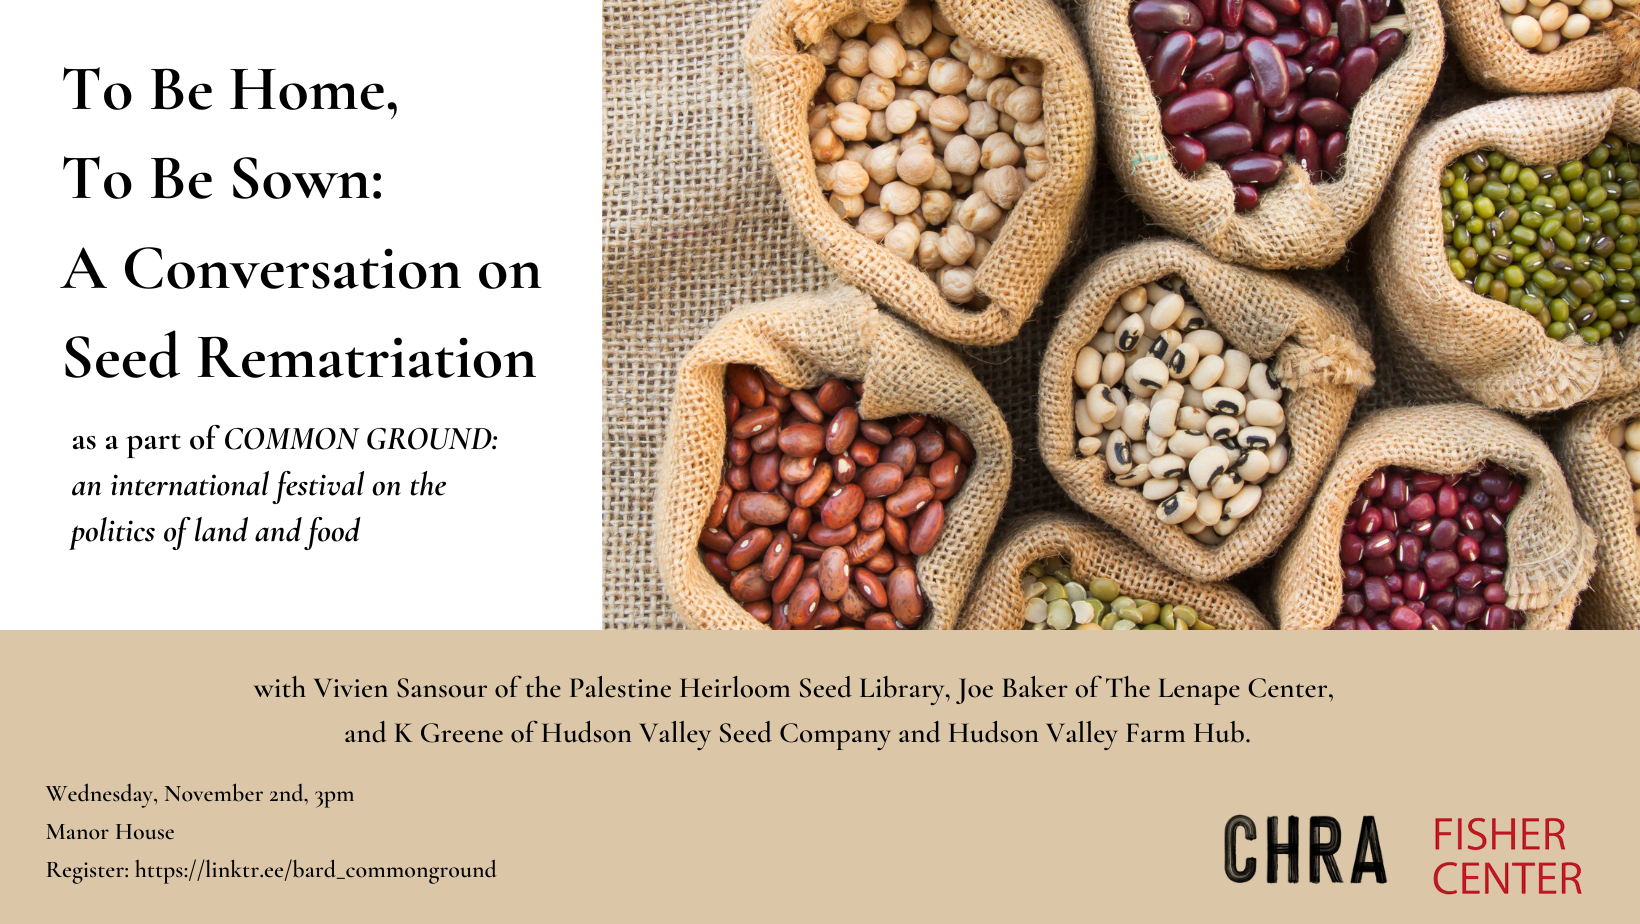 To Be Home, To Be Sown: A Conversation on Seed Rematriation